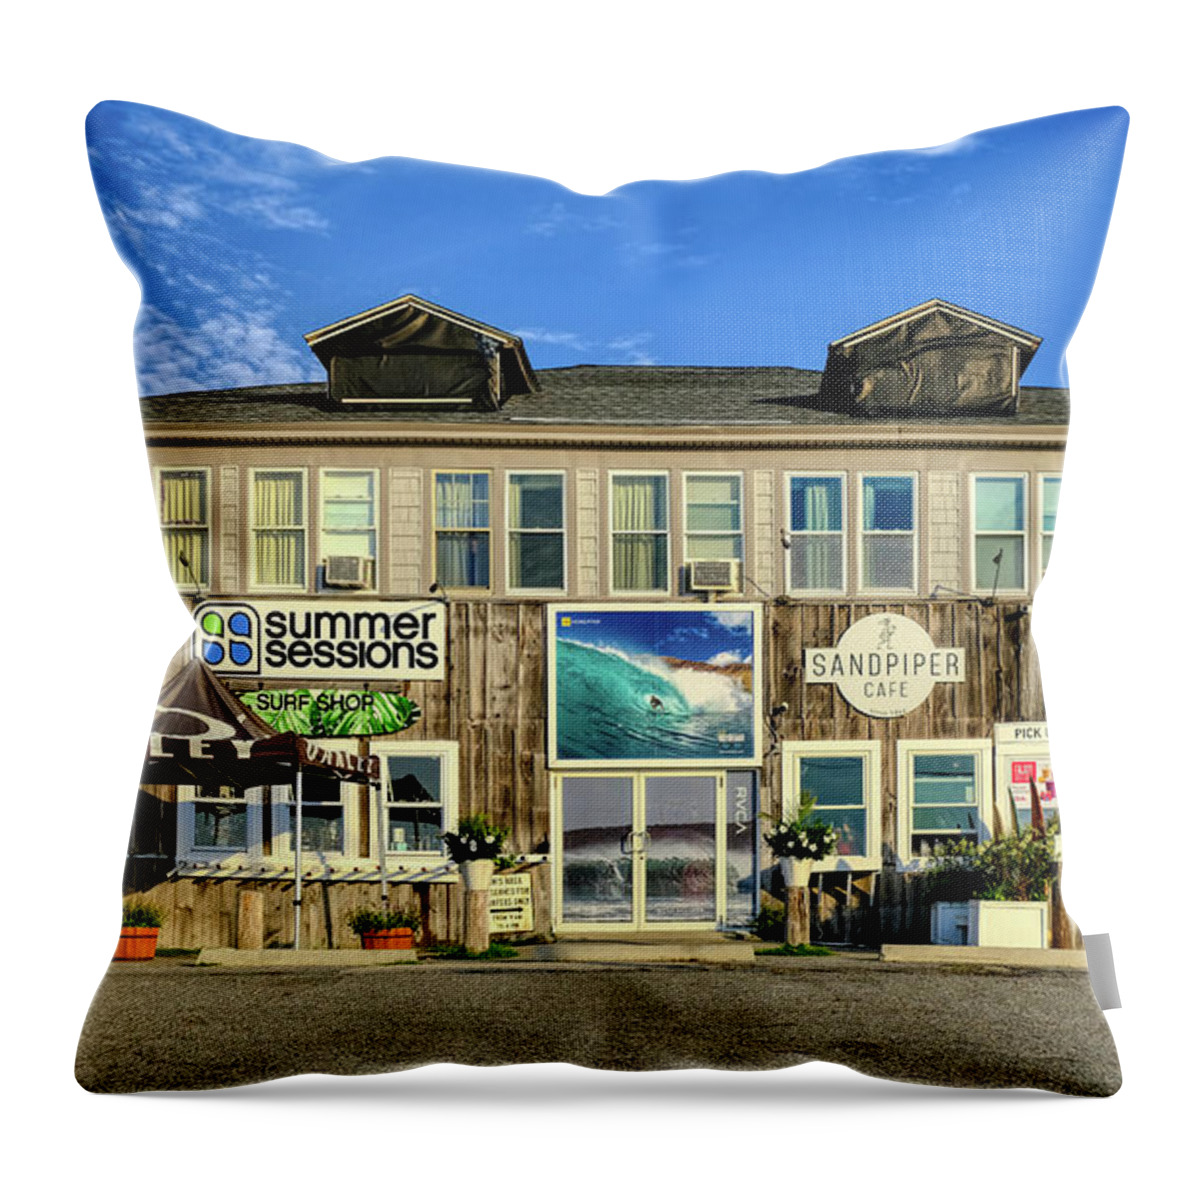 Summer Sessions Surf Shop Throw Pillow featuring the photograph Summer Sessions Surf Shop by Deb Bryce